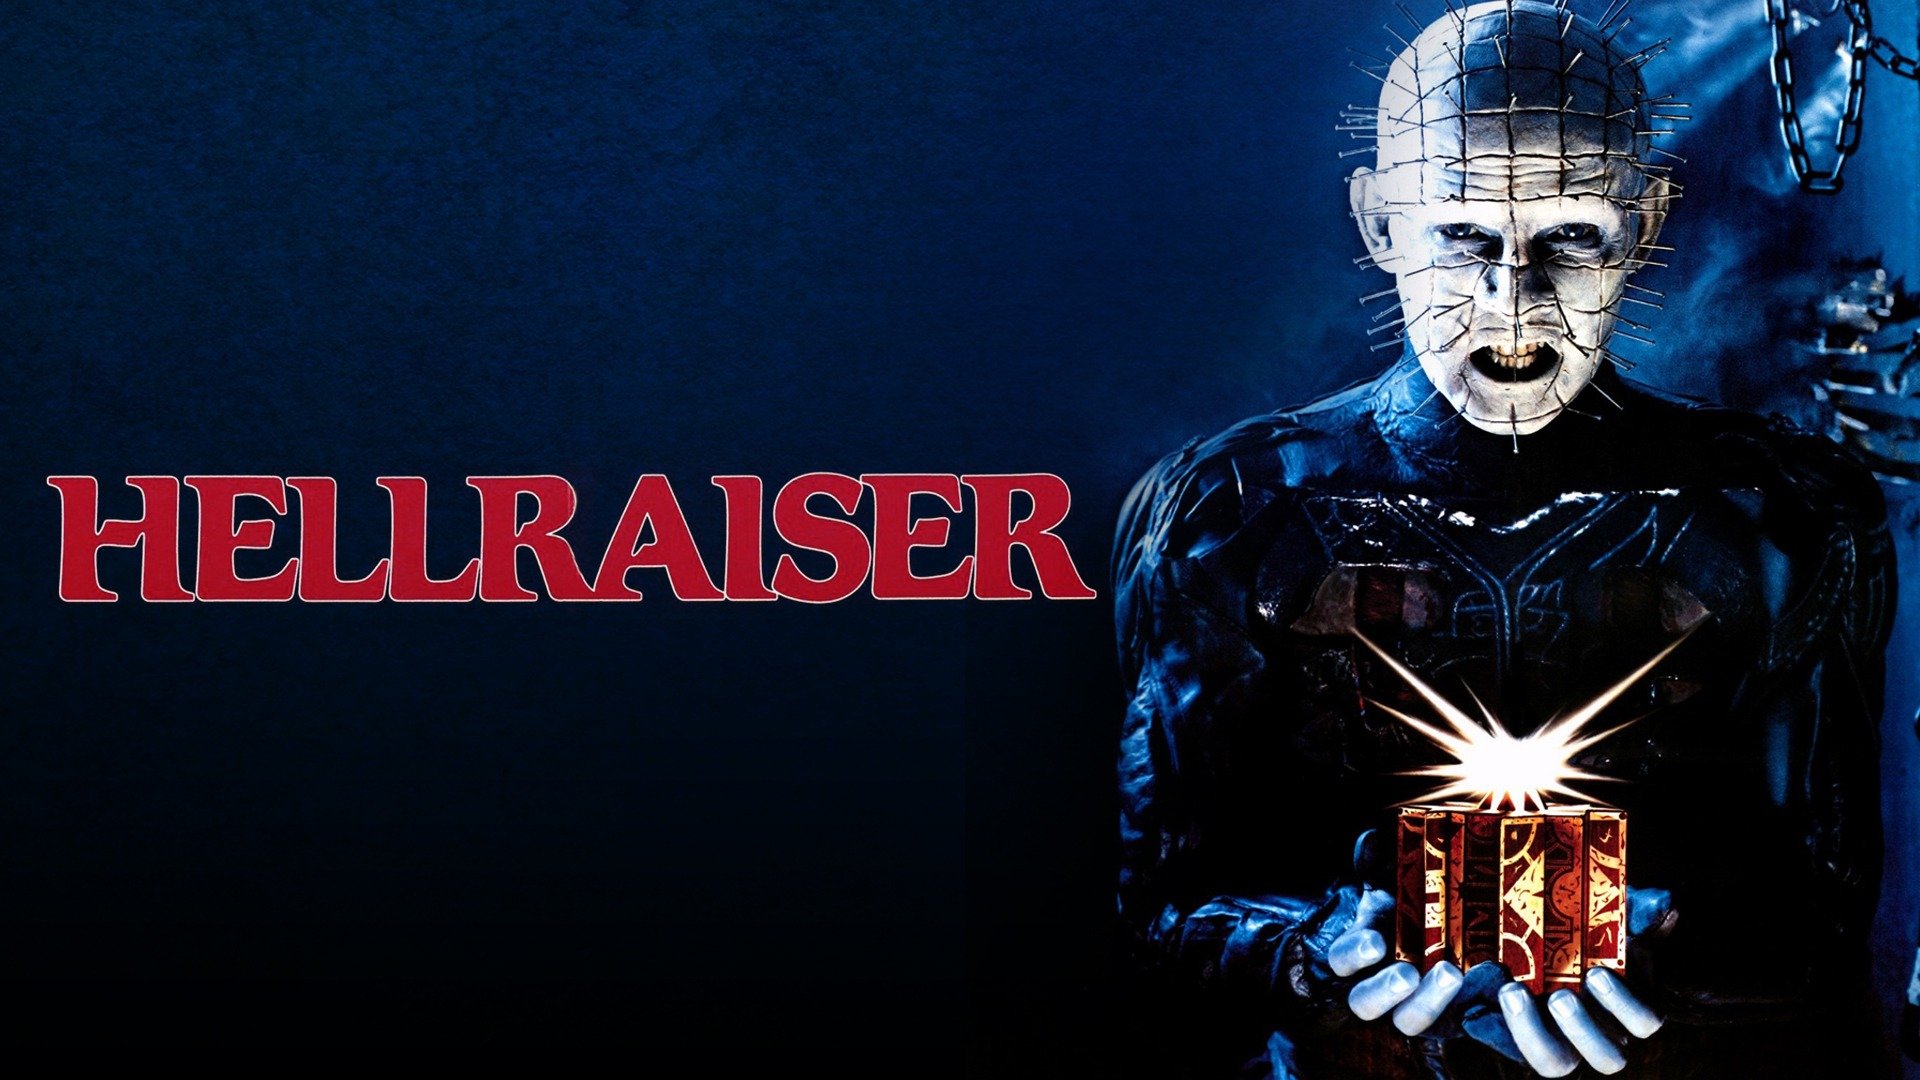 49-facts-about-the-movie-hellraiser